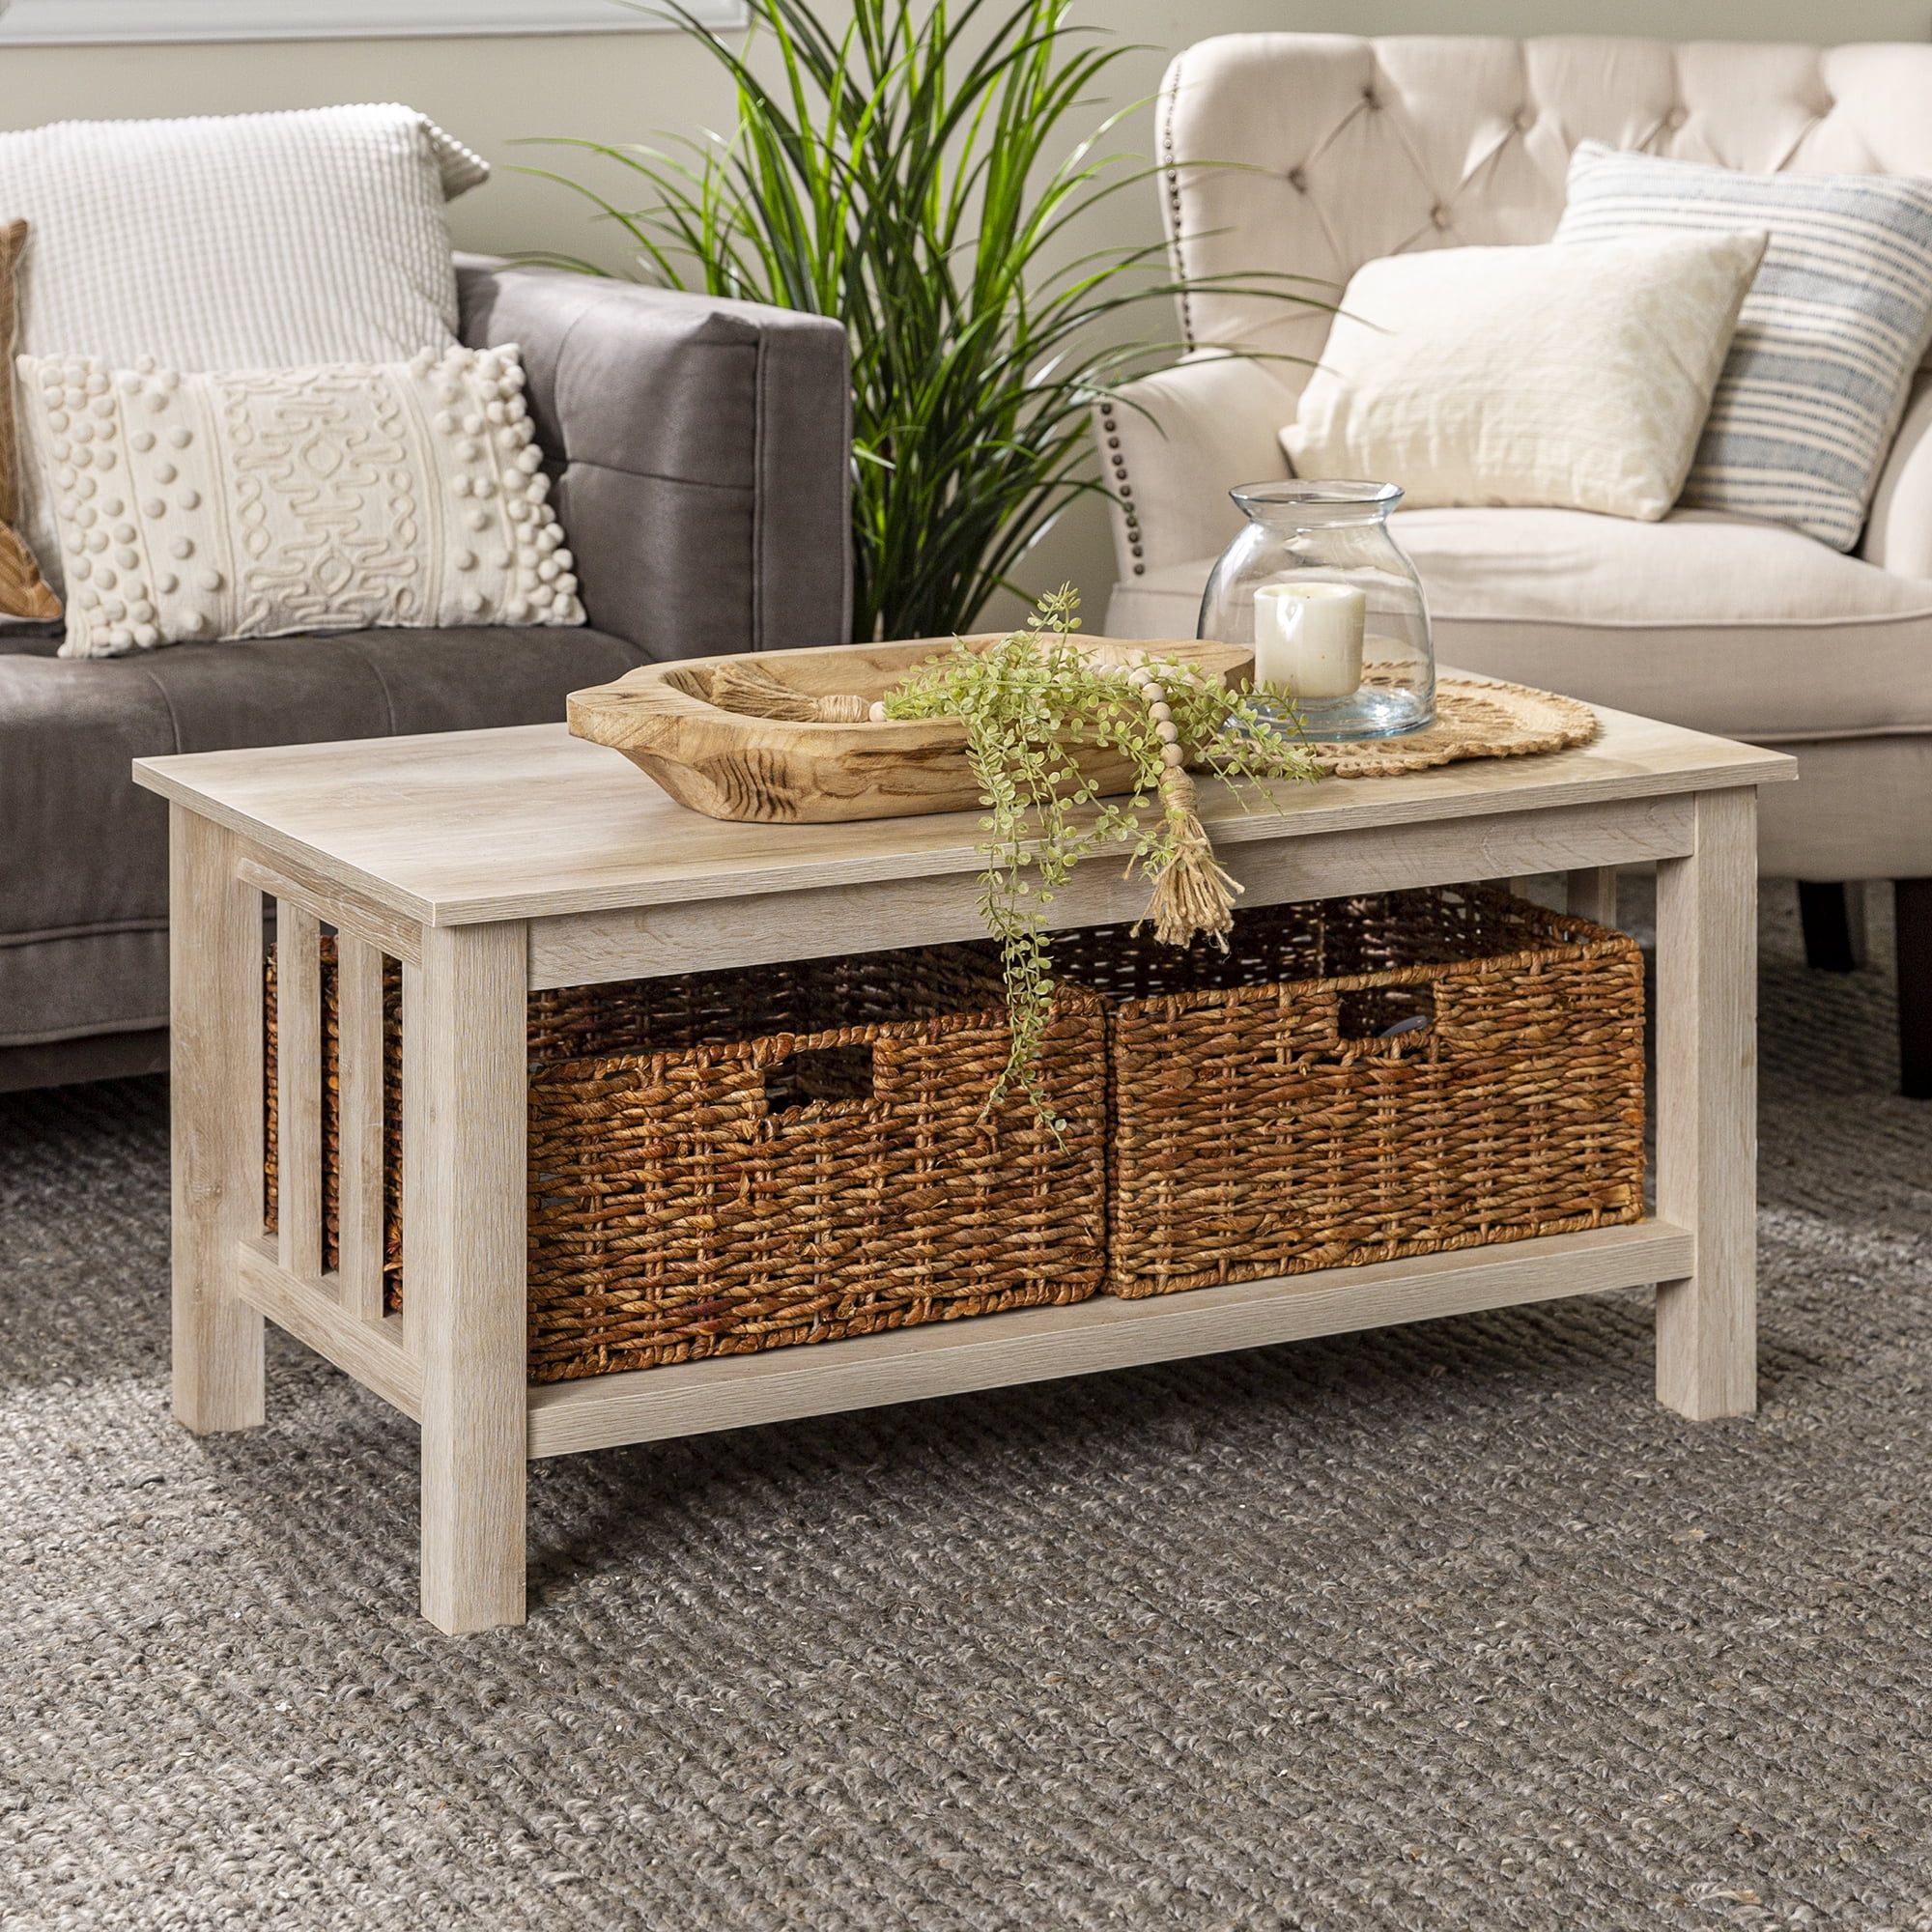 Woven Paths Traditional Storage Coffee Table With Bins, White Oak –  Walmart Regarding Woven Paths Coffee Tables (Photo 1 of 15)